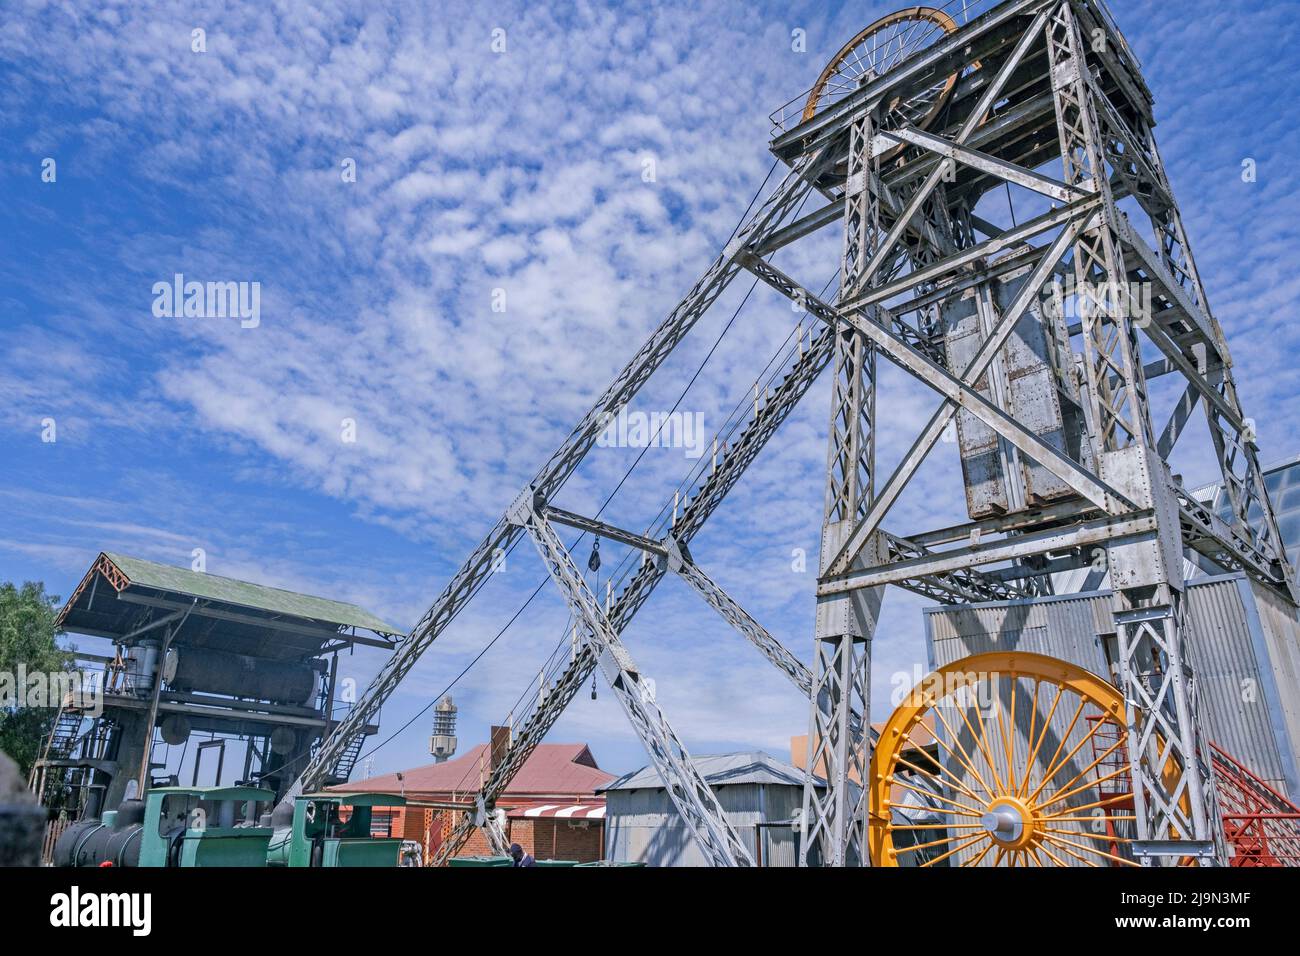 Headframe / winding tower / hoist frame of the Big Hole and Open Mine Museum in Kimberley, Frances Baard, Northern Cape province, South Africa Stock Photo